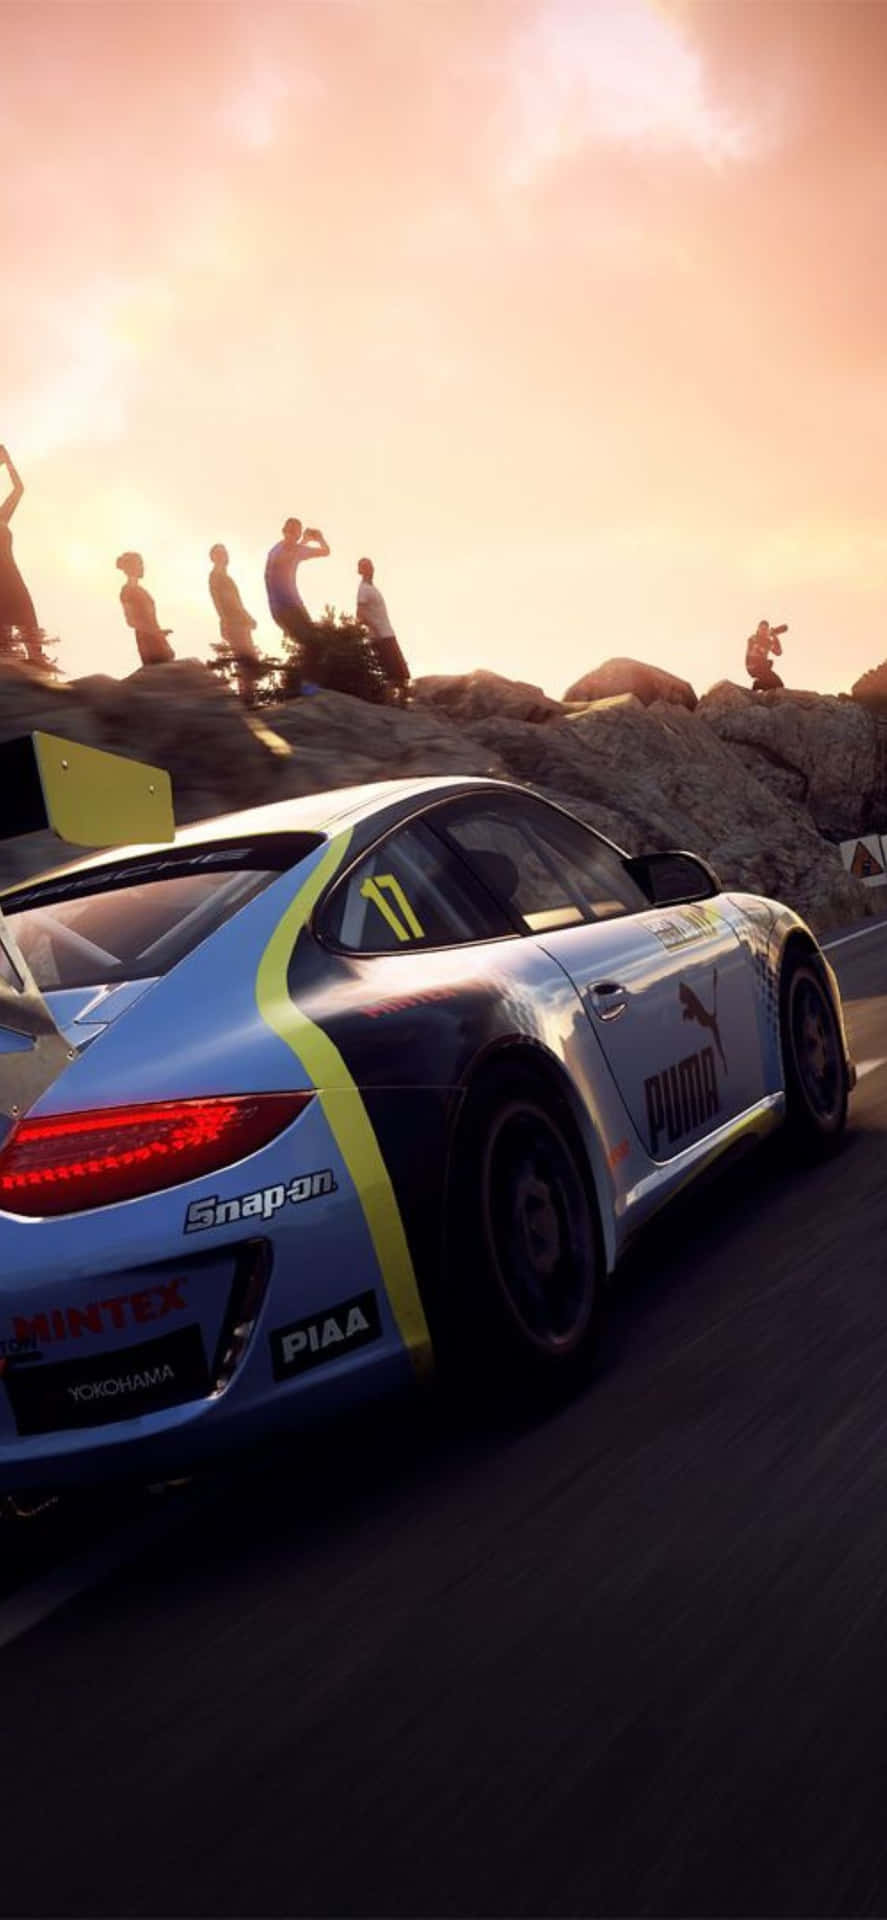 Image  Drivers conquering winding paths in a Dirt Rally competition